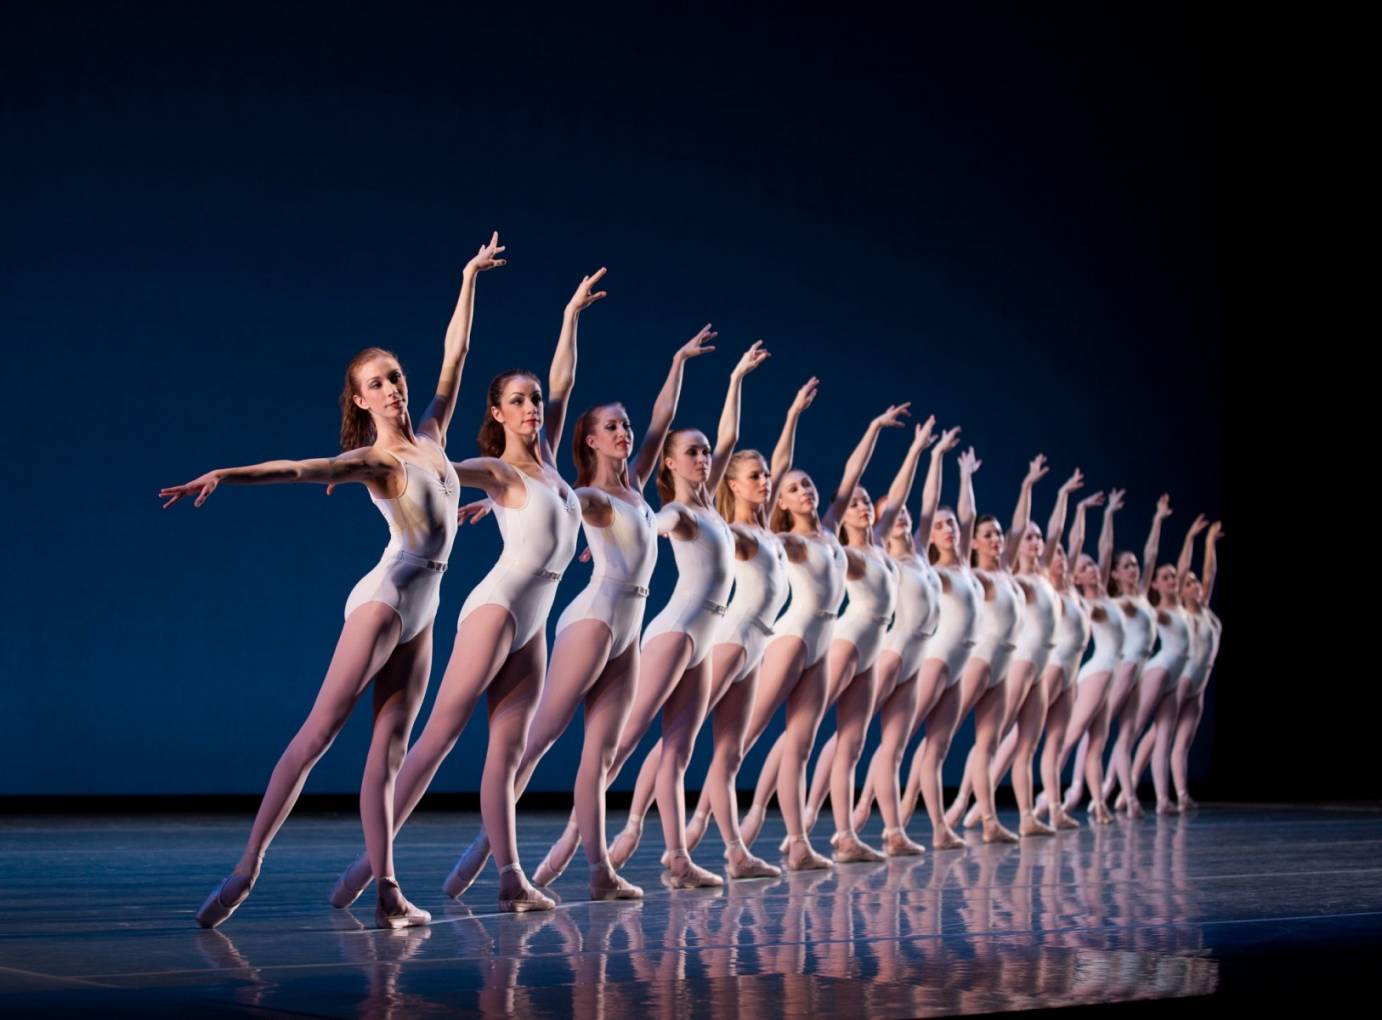 Symphony in 3 Movements AAAAA©The George Balanchine Trust. Photo by Rosalie OConnor